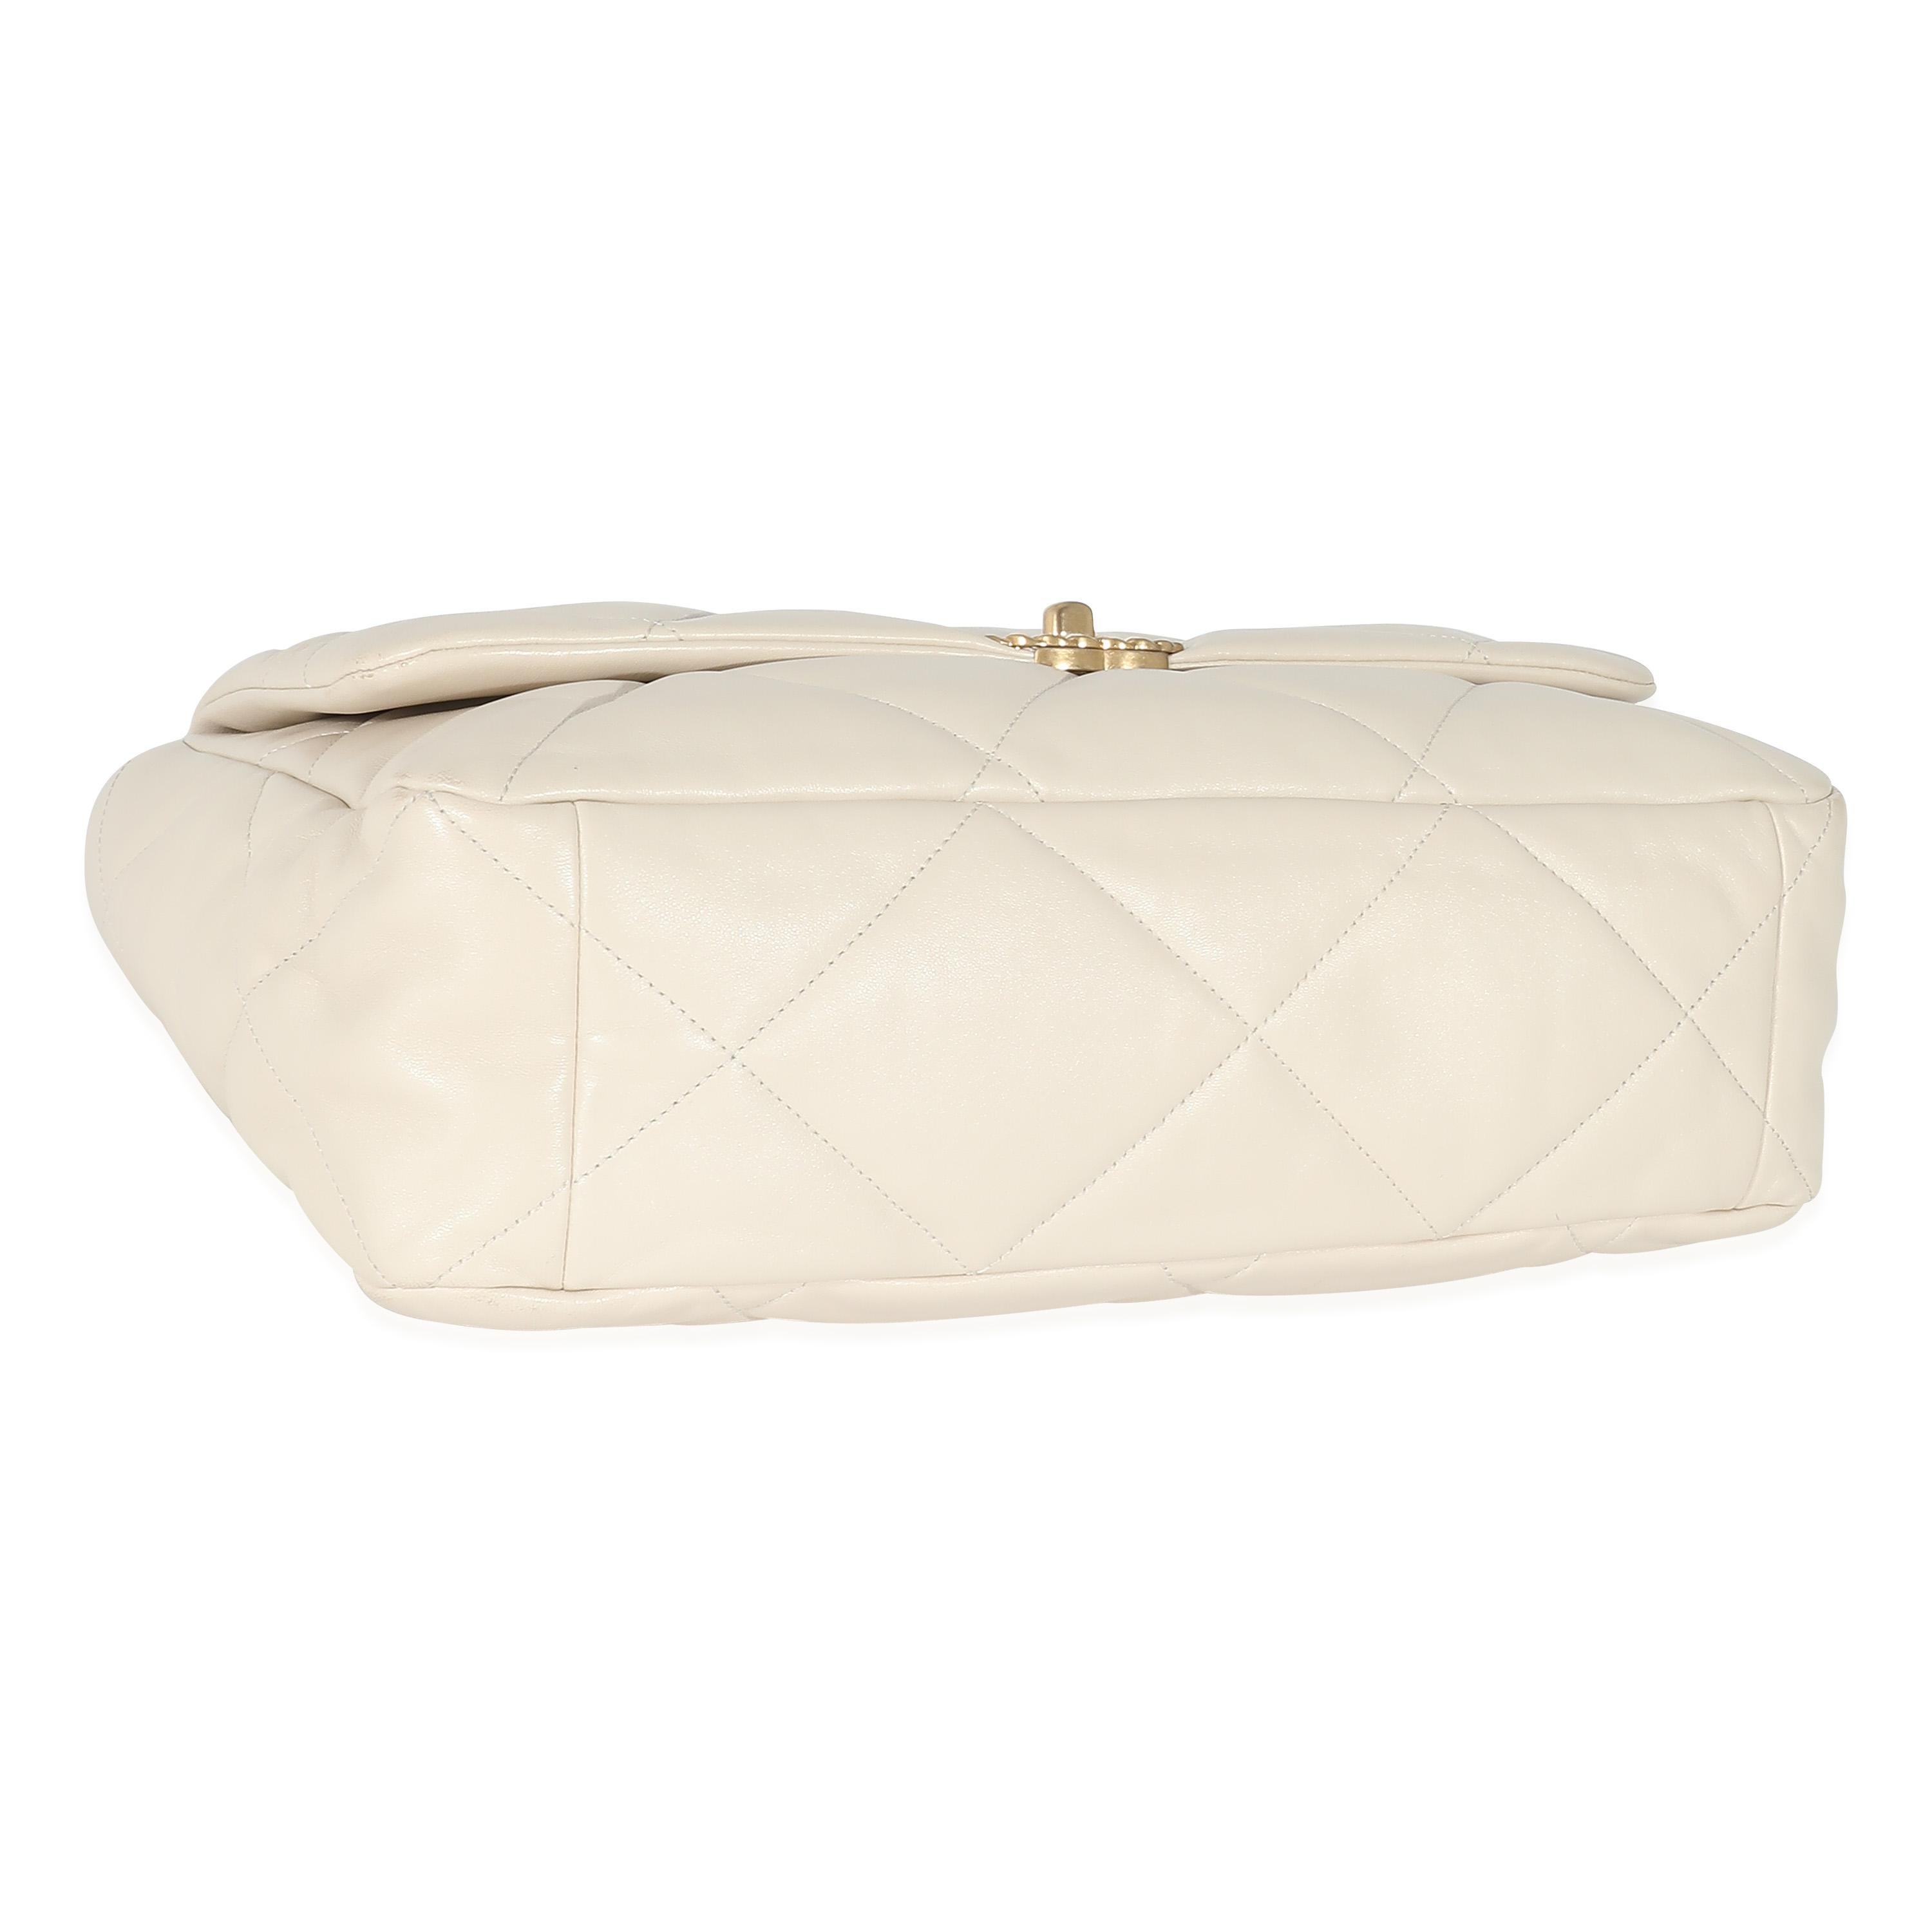 Chanel Ivory Shiny Quilted Lambskin Maxi Chanel 19 Flap Bag For Sale 1